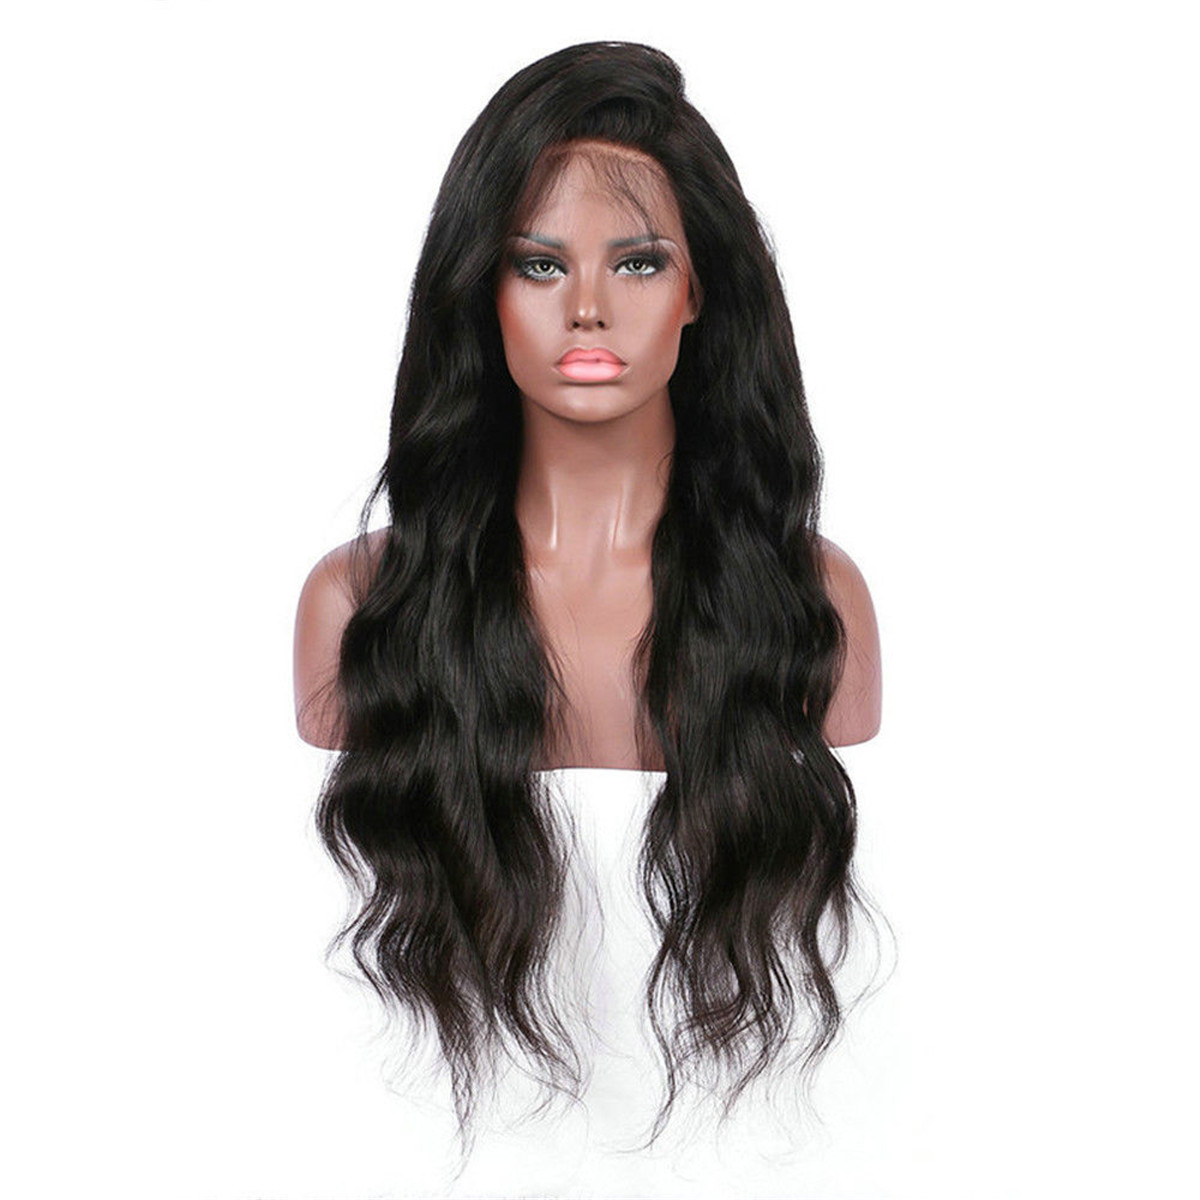 26-inch-Black-Women-Curly-Wig-Glueless-Full-Lace-Wigs-Remy-Lace-Front-Hair-1285227